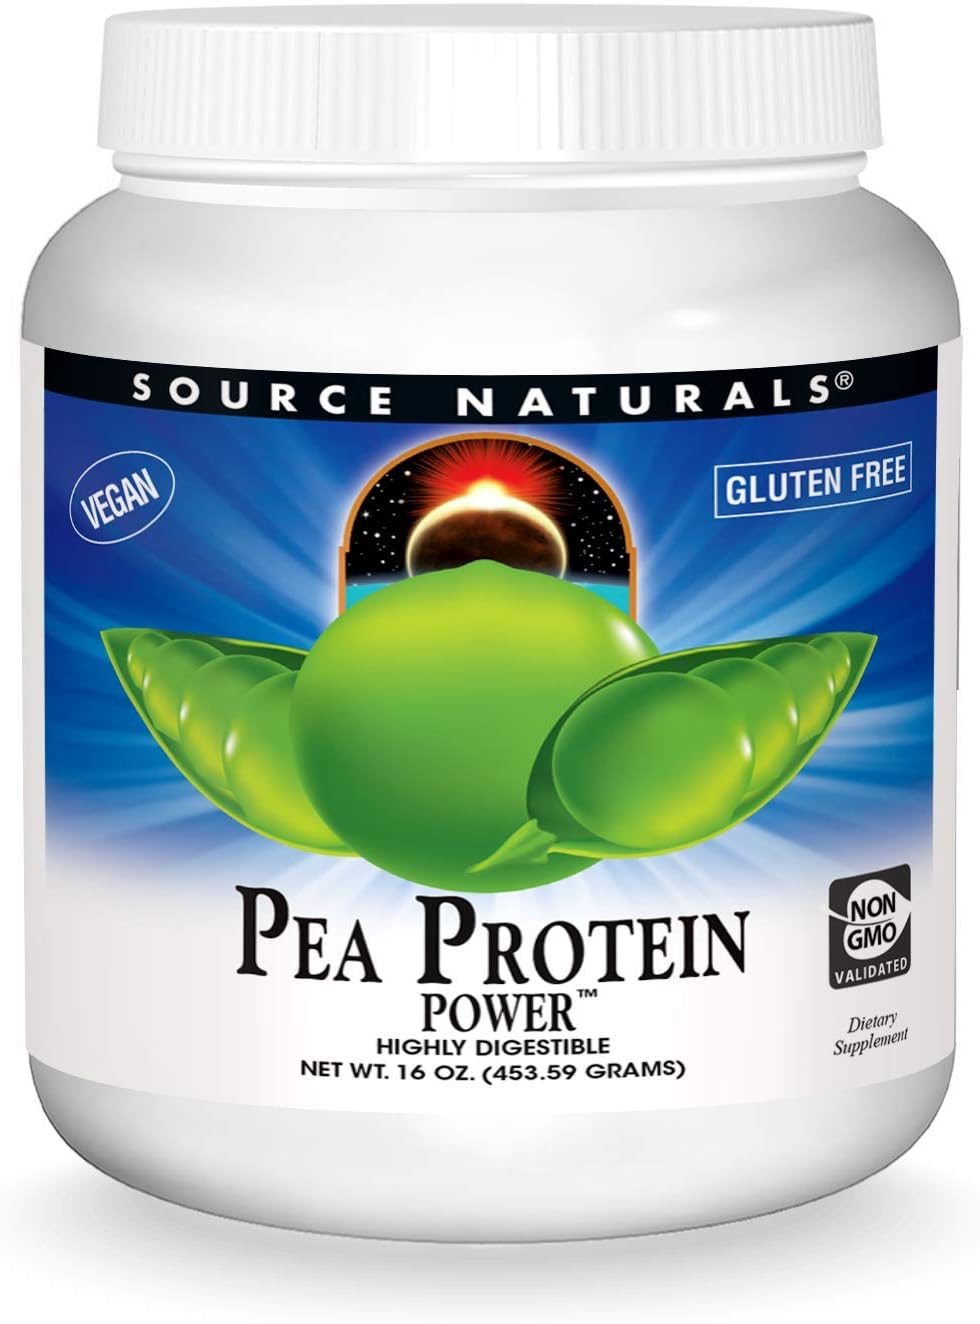 Source Naturals Pea Protein Power Plant-Based Protein Powder - Easy to Digest, Bioavailable, Non-Dairy, Vegan, Non-GMO, Gluten Free, Sugar Free, Unflavored* - 16oz